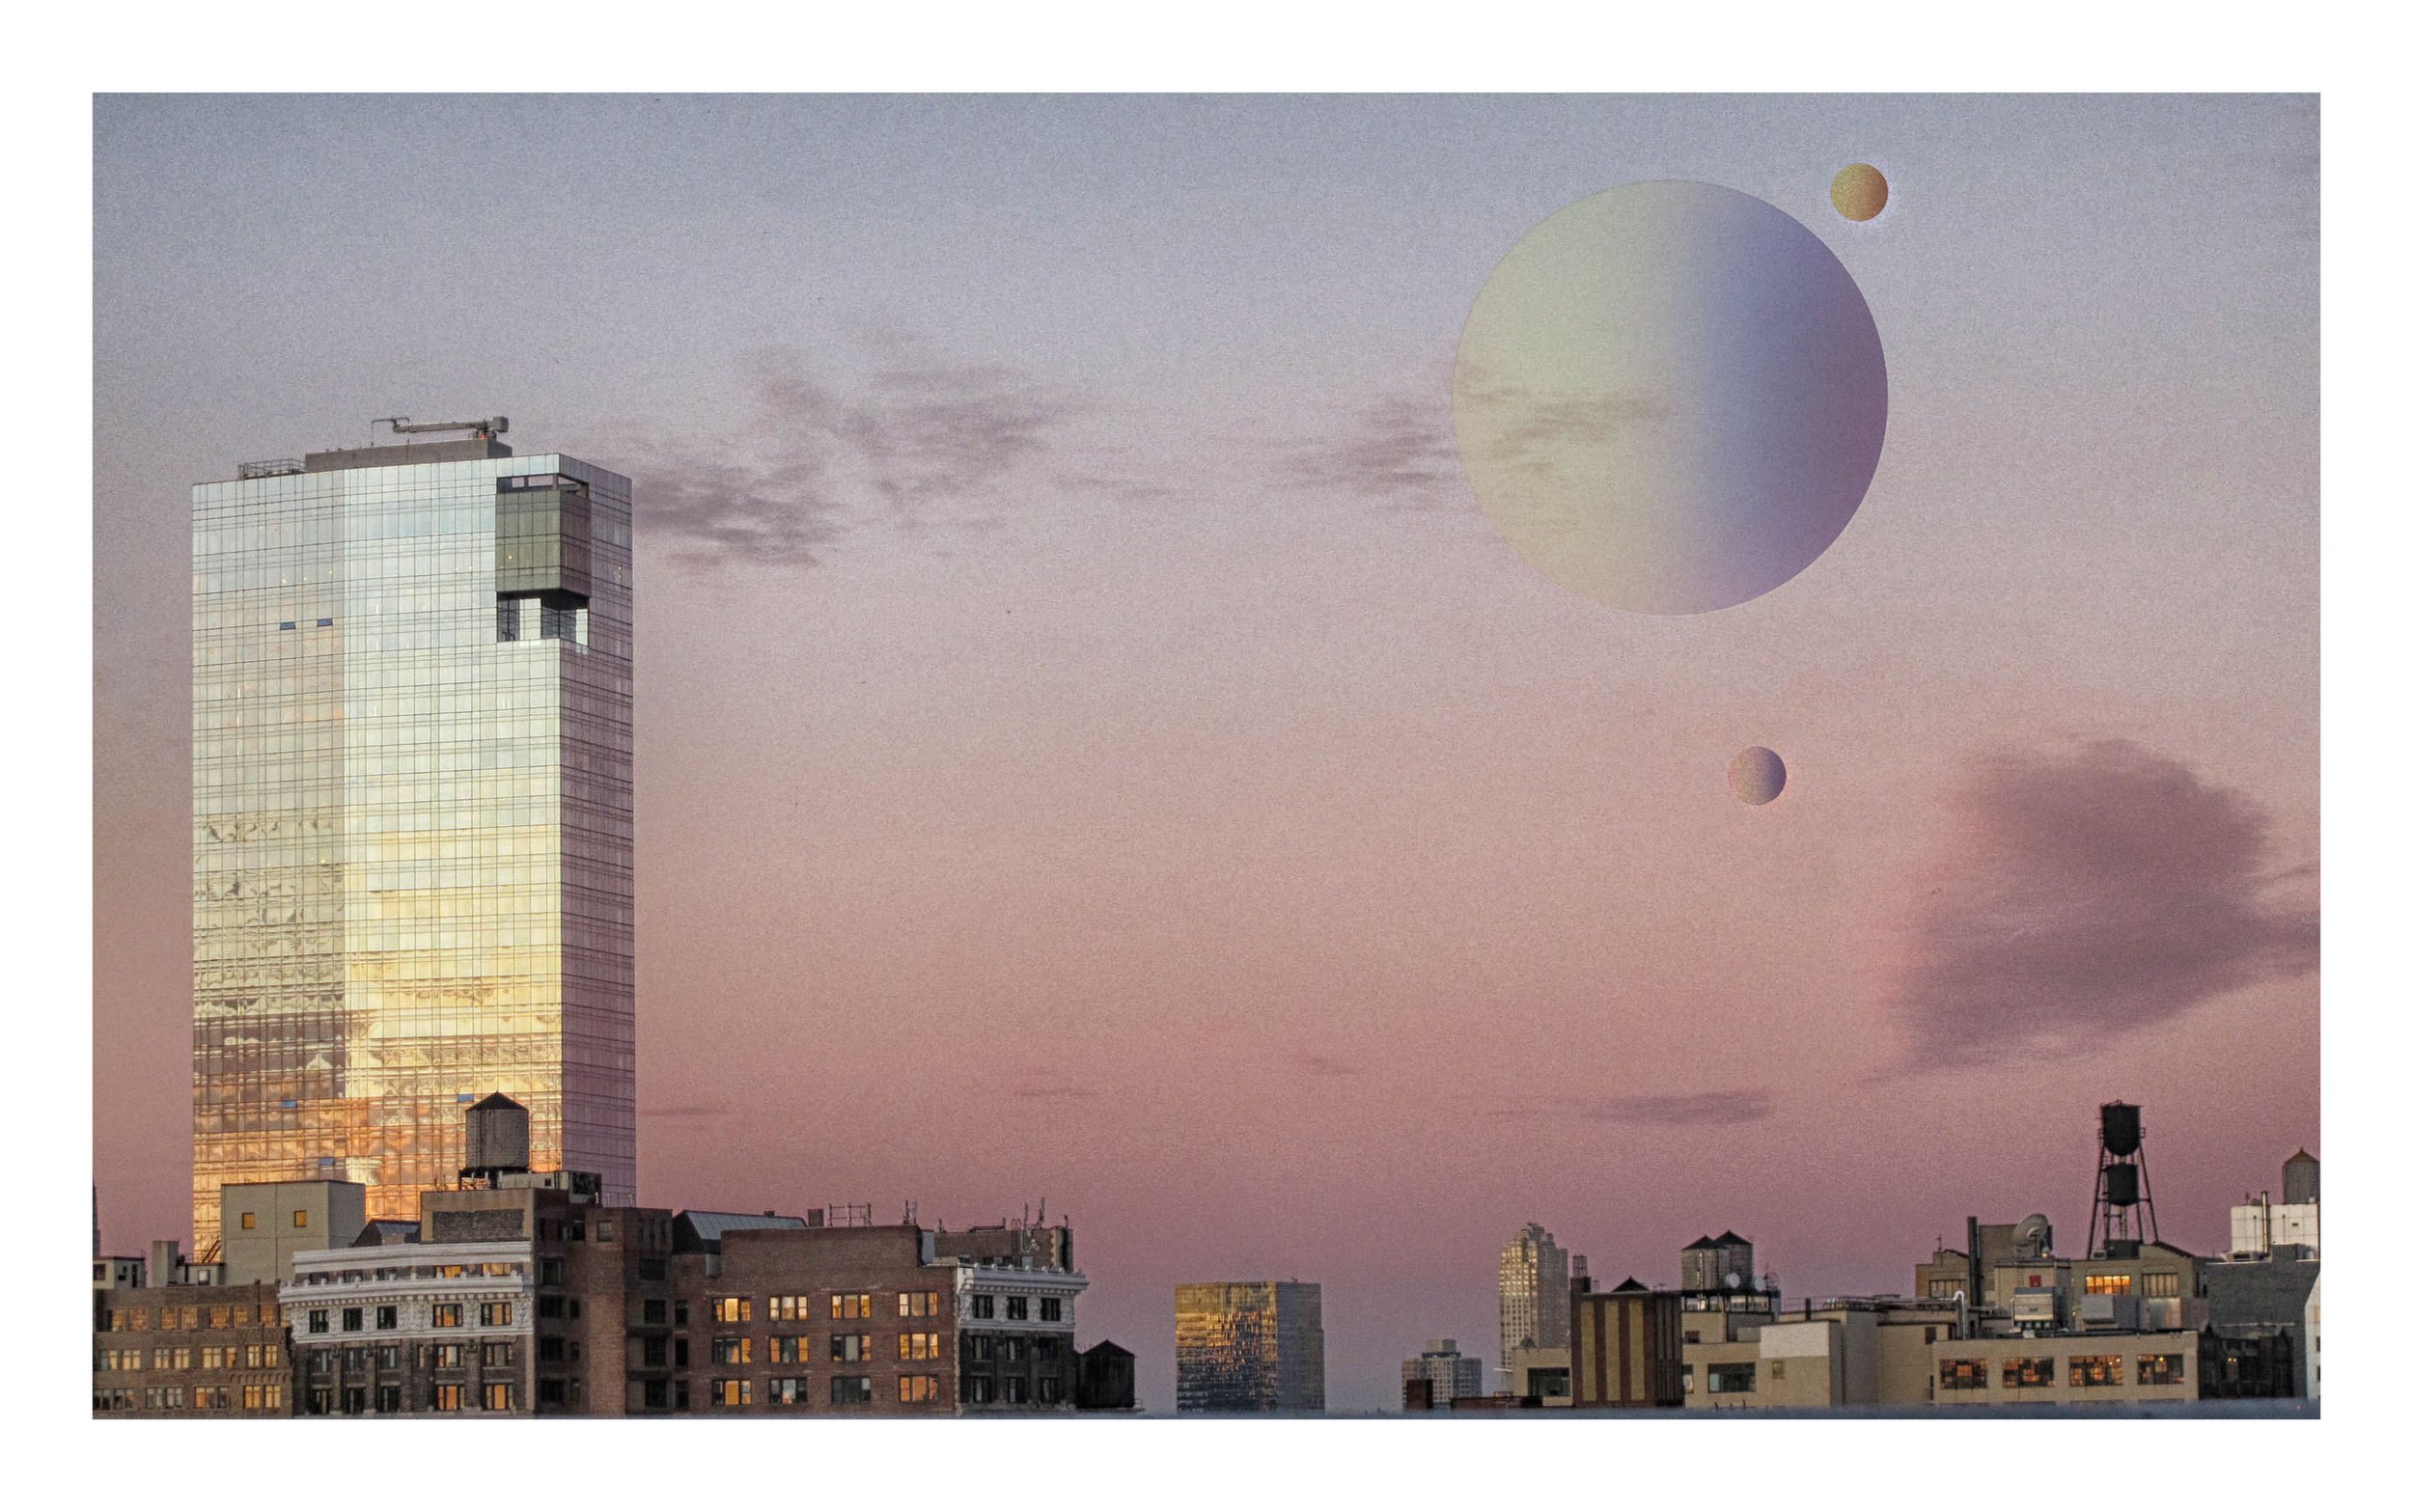 The Moon and Its Satellites Are Higher Than the Tallest Building.